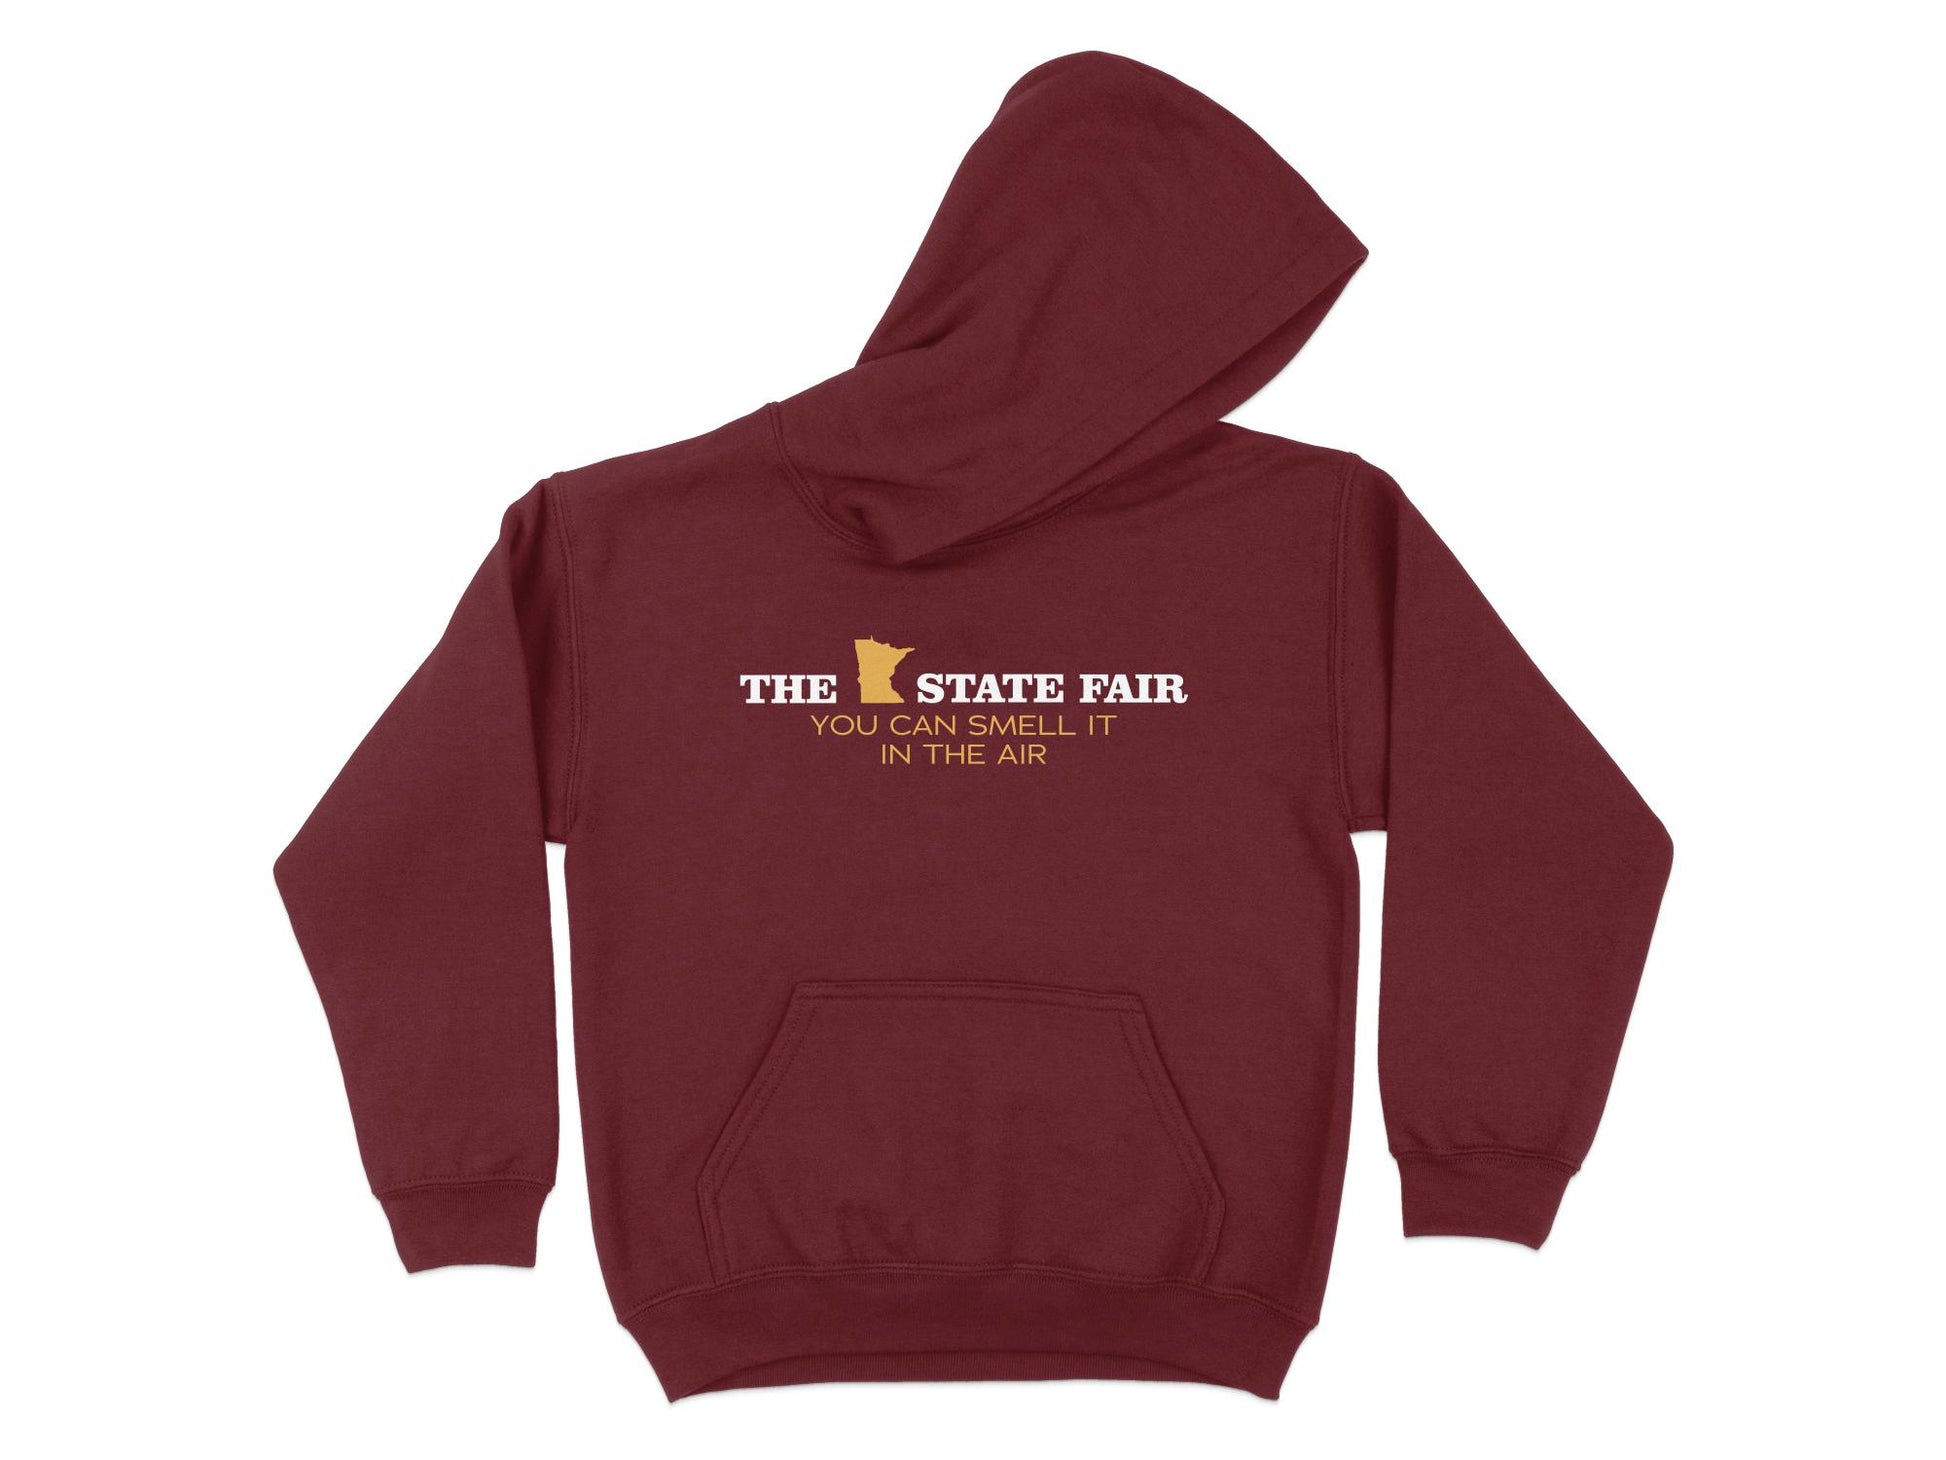 Minnesota State Fair Hoodie - You Can Smell It in the Air, maroon